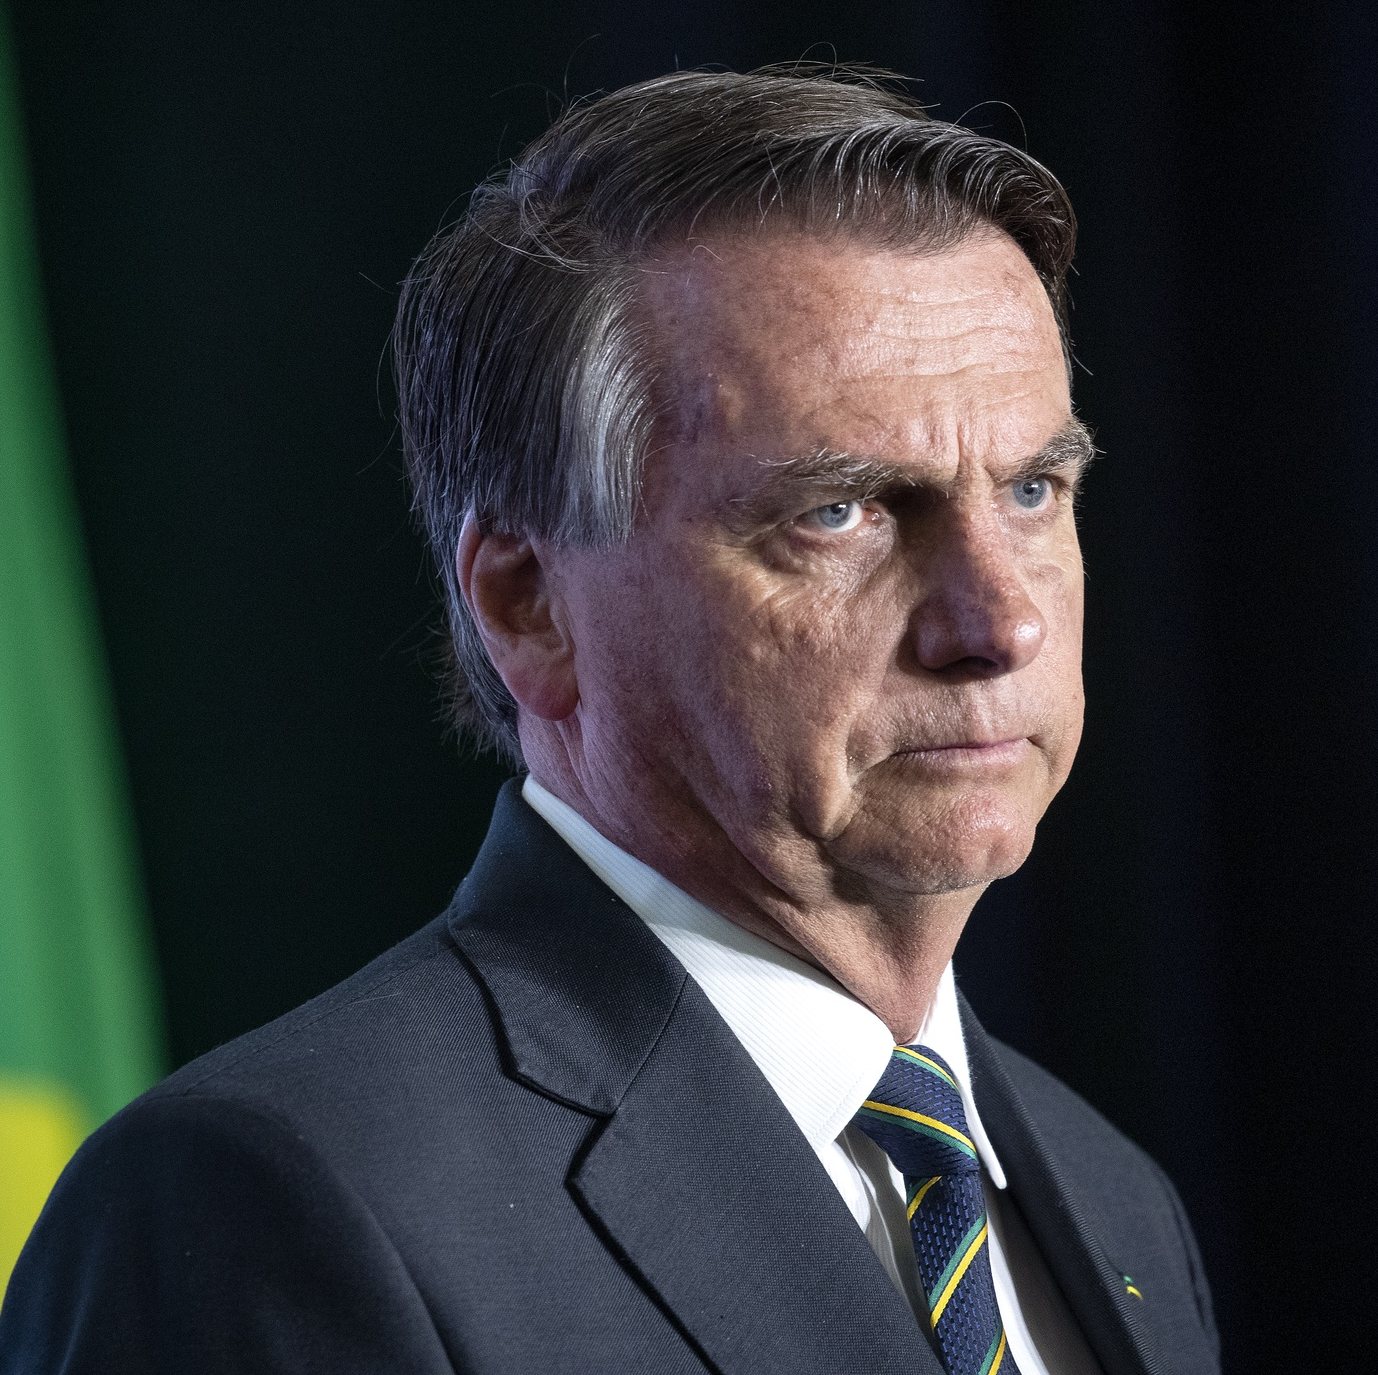 epa10446309 Former Brazil President Jair Bolsonaro attends the &#039;Power of the People&#039; event at the Trump National Doral Miami, in Miami, Florida, USA, 03 February 2023. The event was hosted by Turning Point USA, a non-profit organization founded in 2012. According to the event organizers, it was Bolsonaro&#039;s first public event following the recent Brazilian elections.  EPA/CRISTOBAL HERRERA-ULASHKEVICH